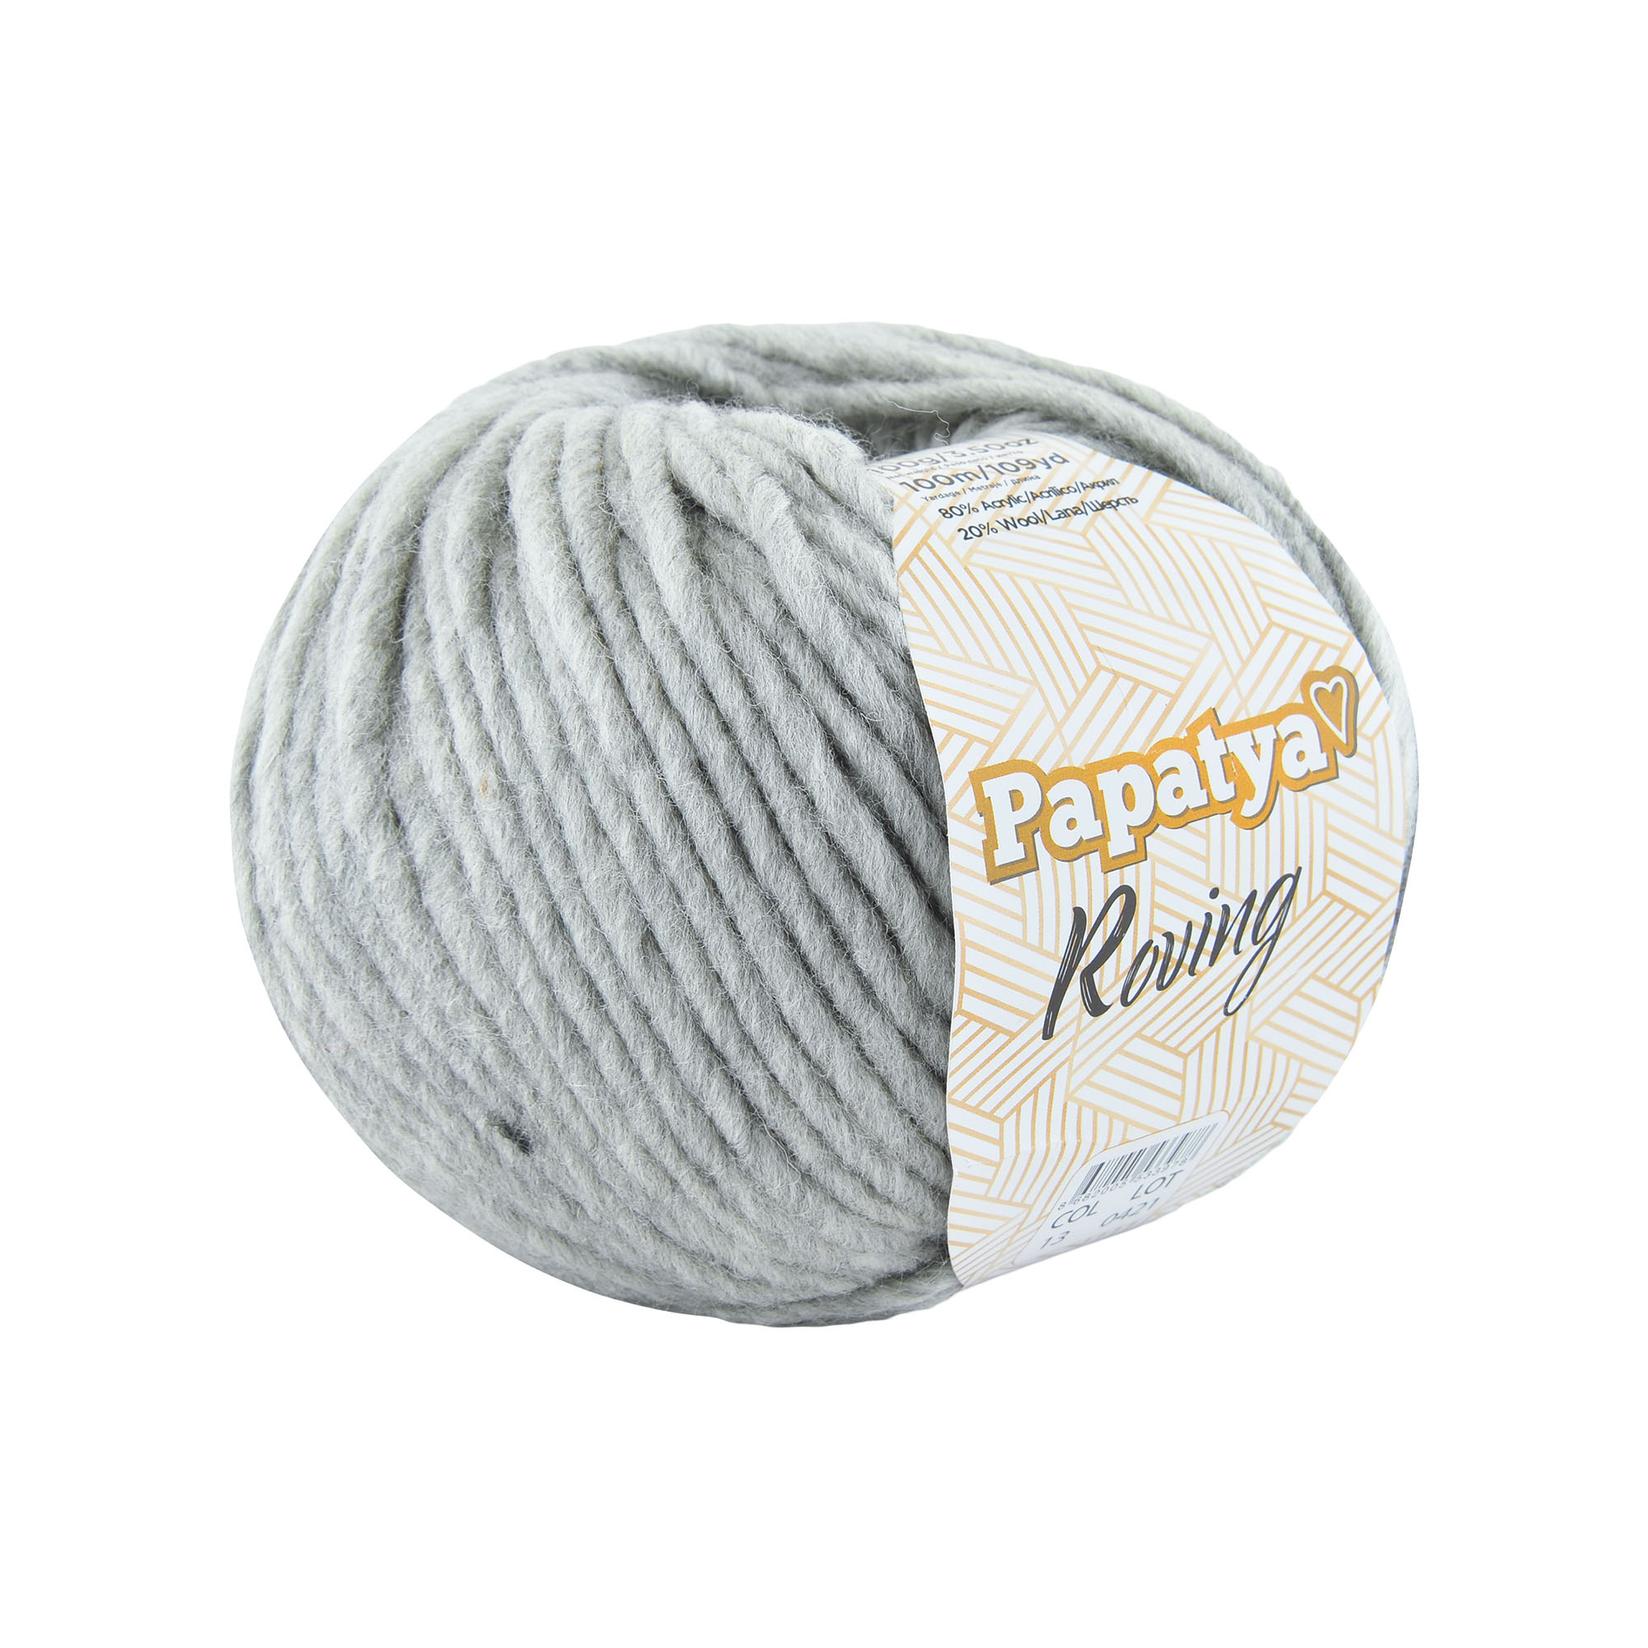 Selected image for PAPATYA Vunica Roving 13